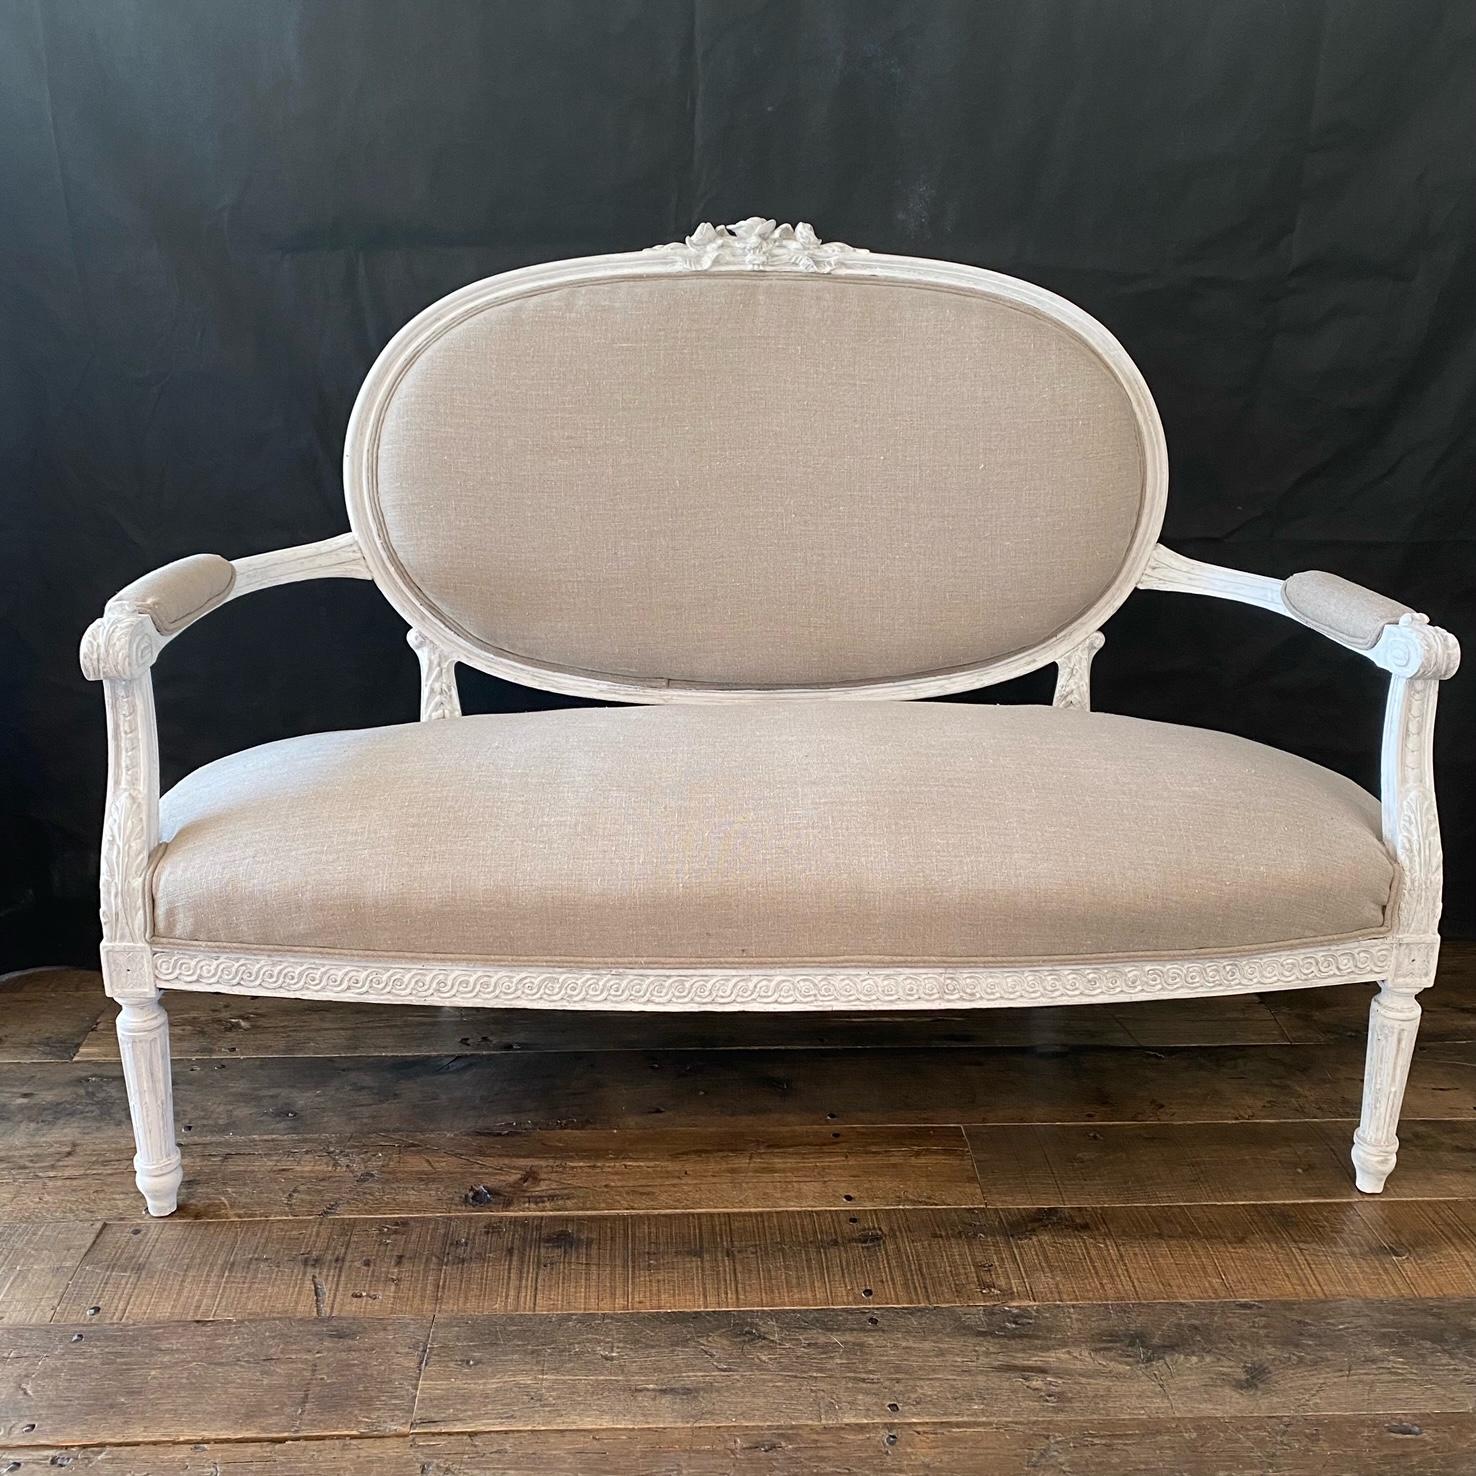 A very pretty late 19th century three piece Louis XVI style parlor set consisting of a settee and a pair of arm chairs having beautiful carved designs on the painted arms and legs and classic oval backs. Newly reupholstered in a French linen cotton